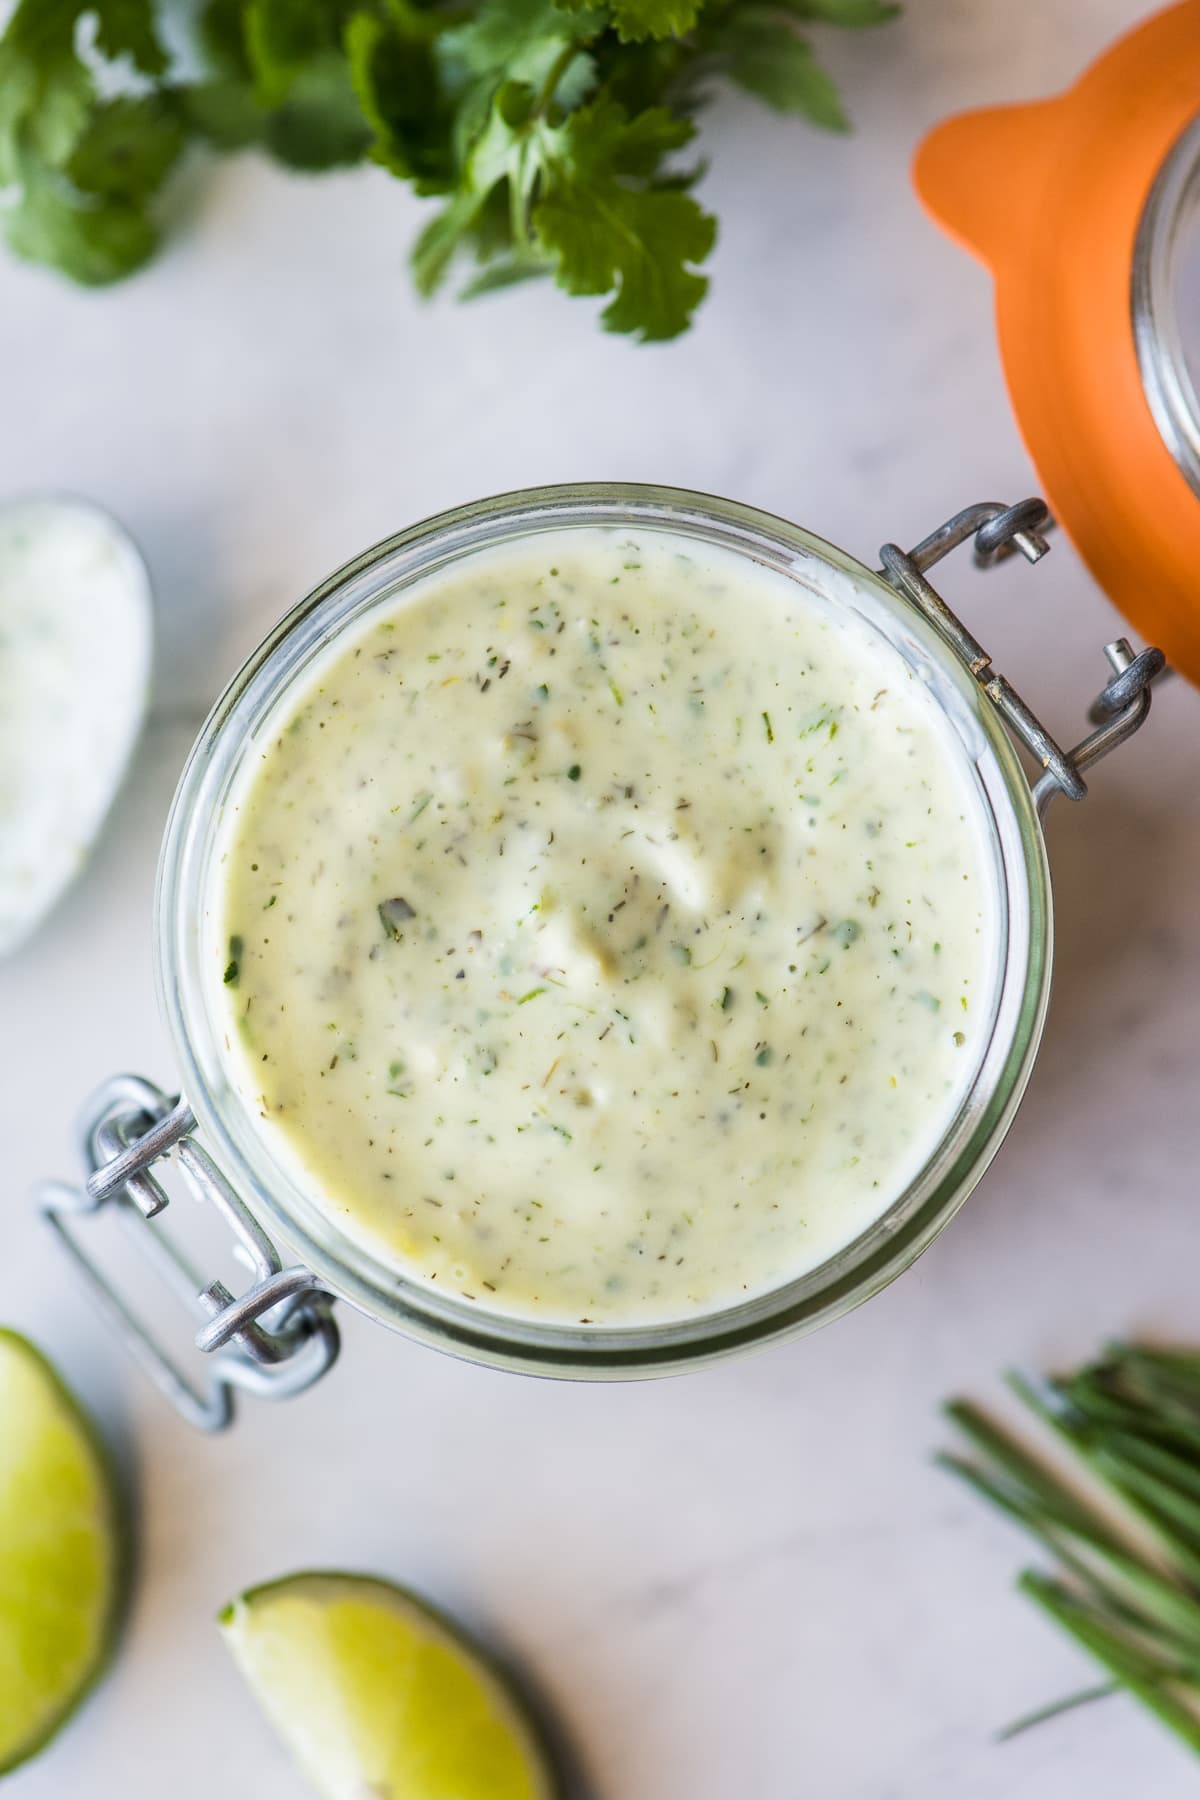 Jalapeno ranch in a glass jar ready to eat.